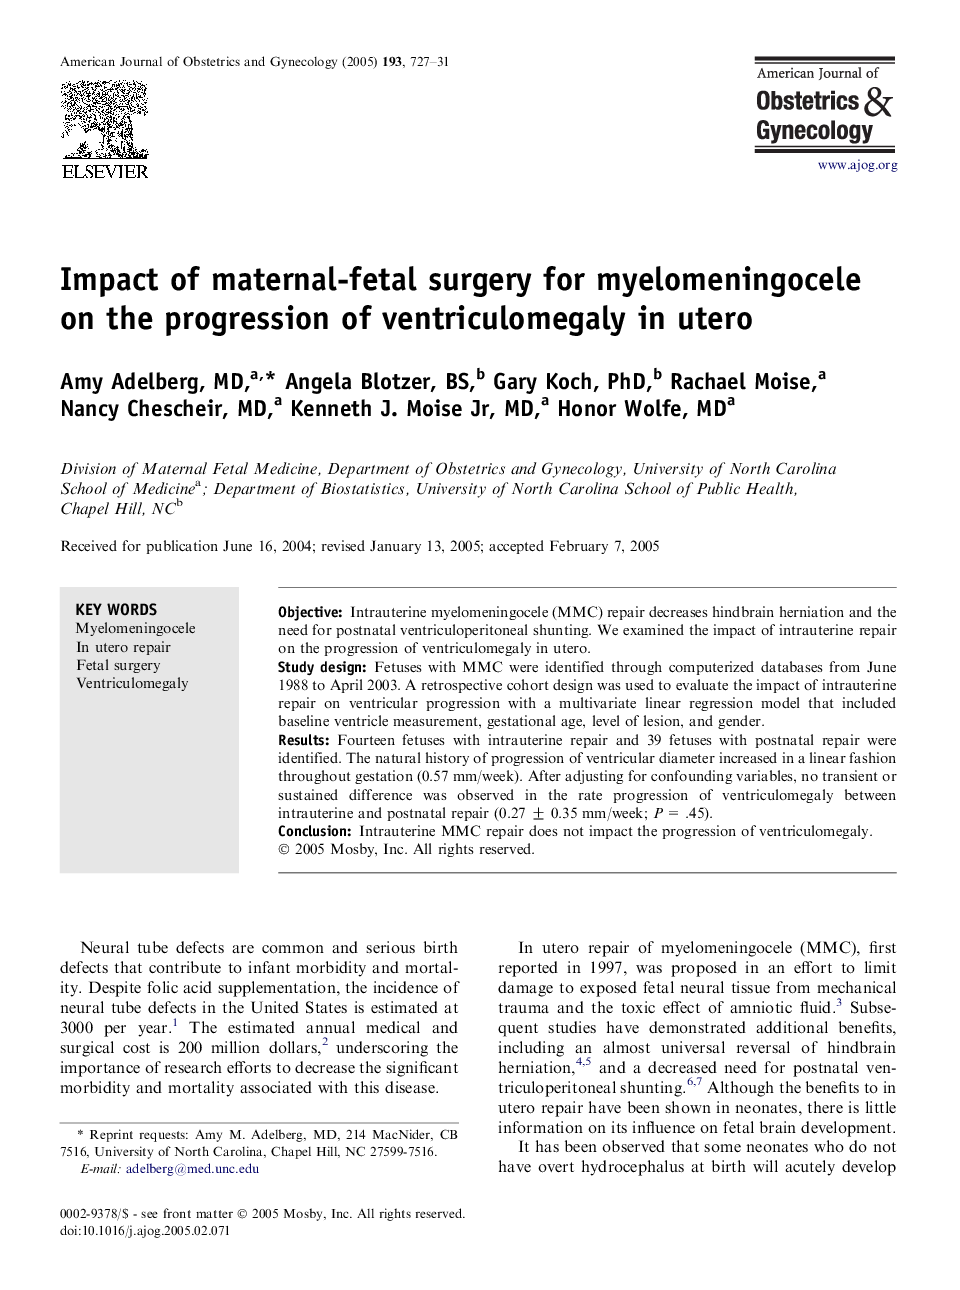 Impact of maternal-fetal surgery for myelomeningocele on the progression of ventriculomegaly in utero